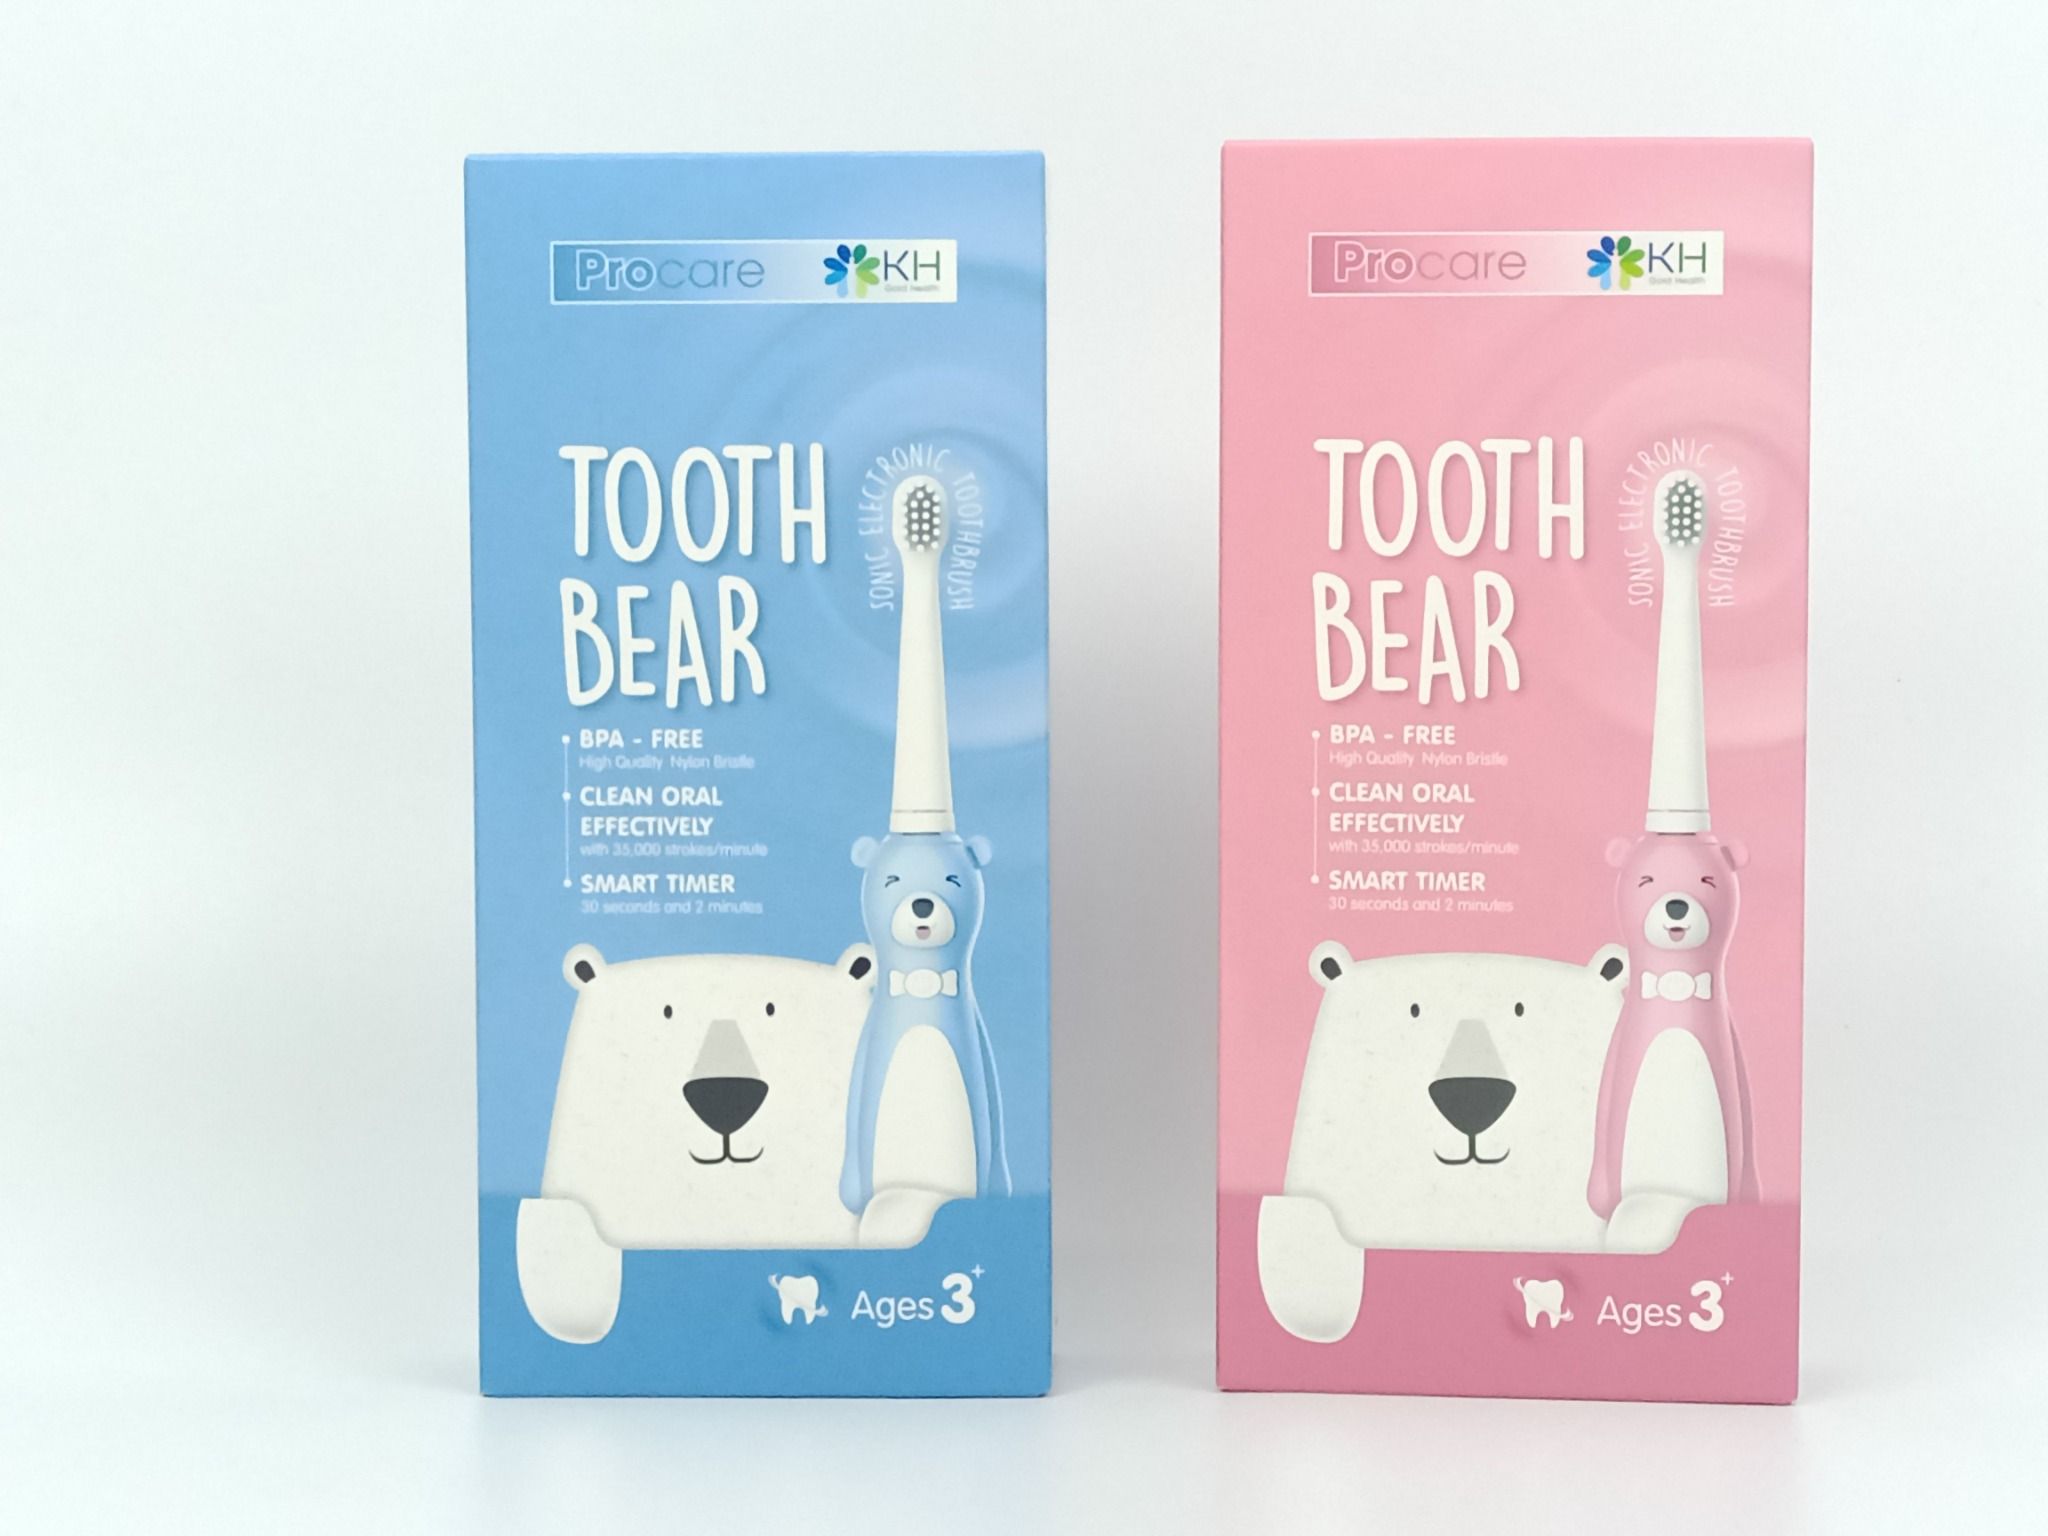 ban chai may tre em procare tooth bear